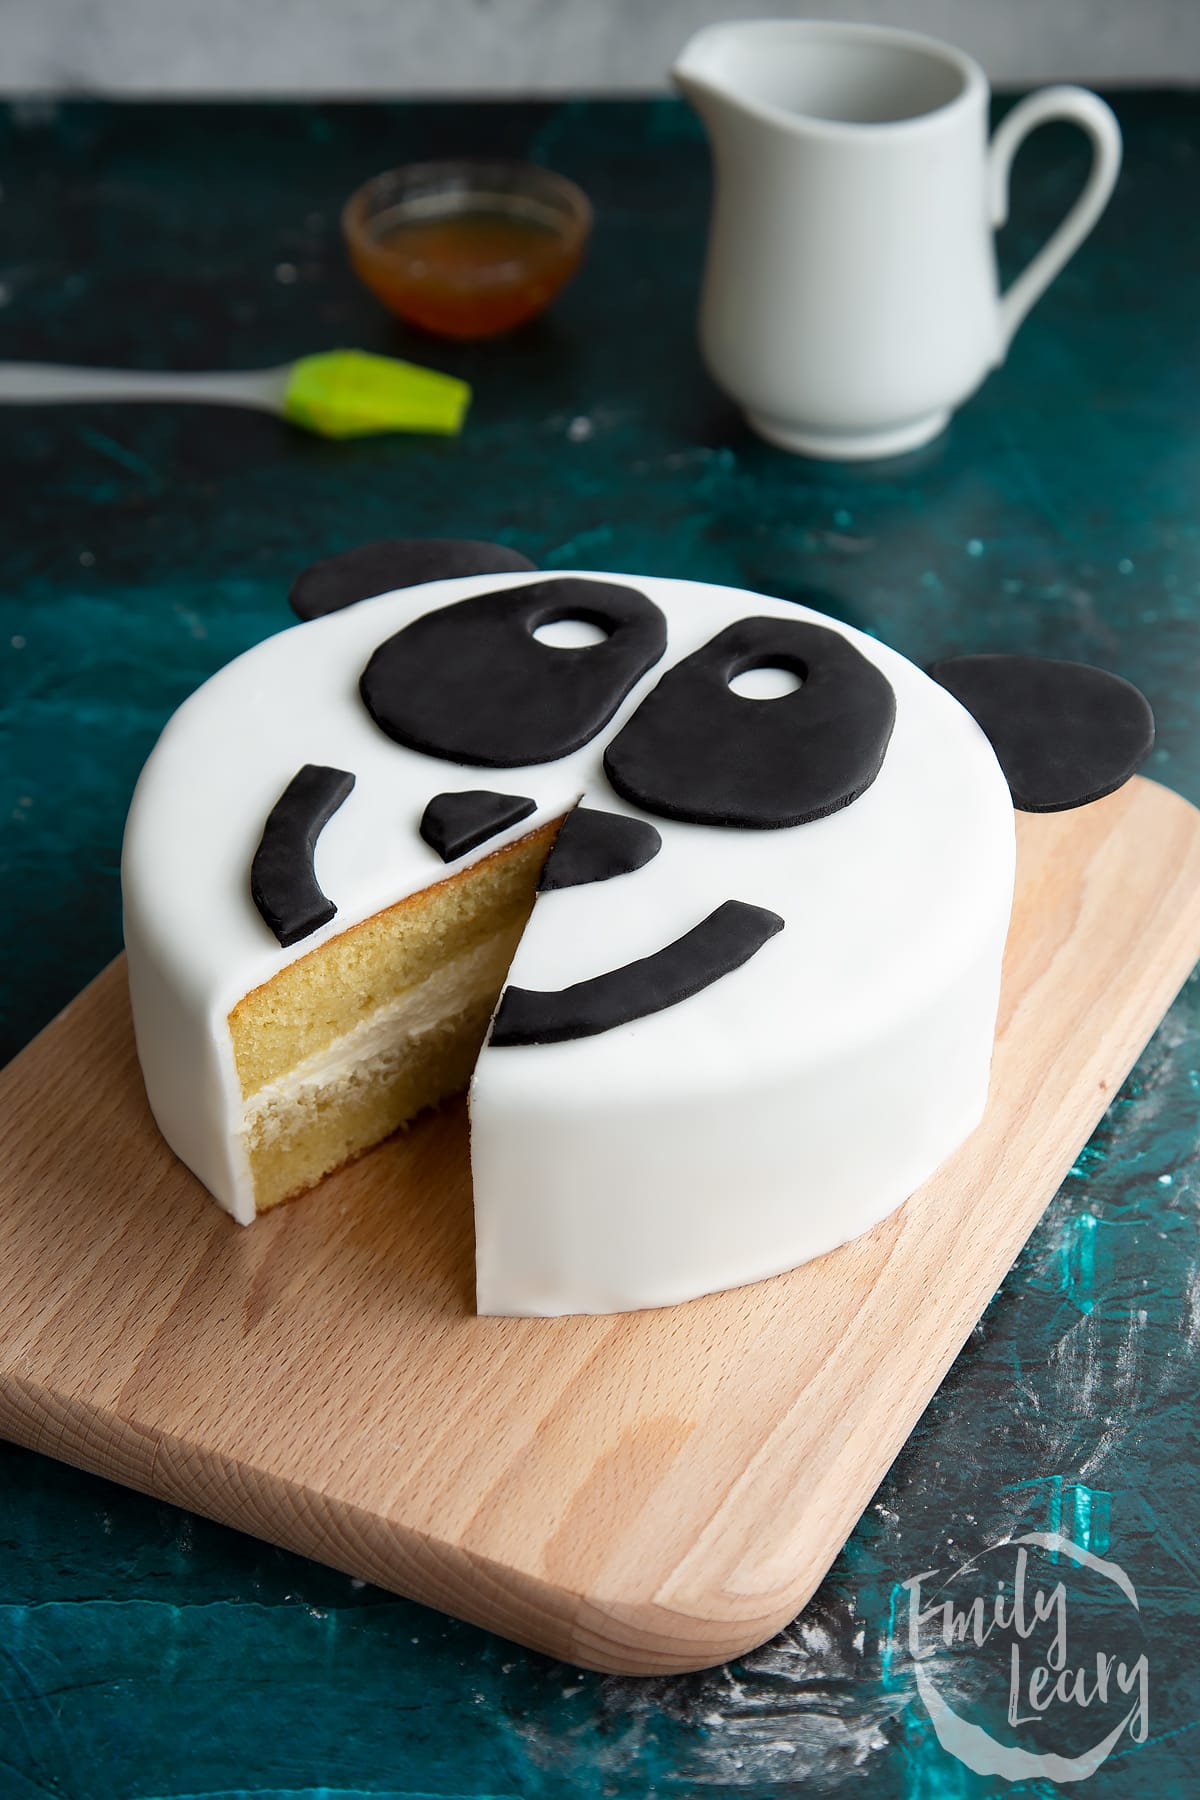 a panda face cake with ears on the top on a wooden board with a slice cut out the front.